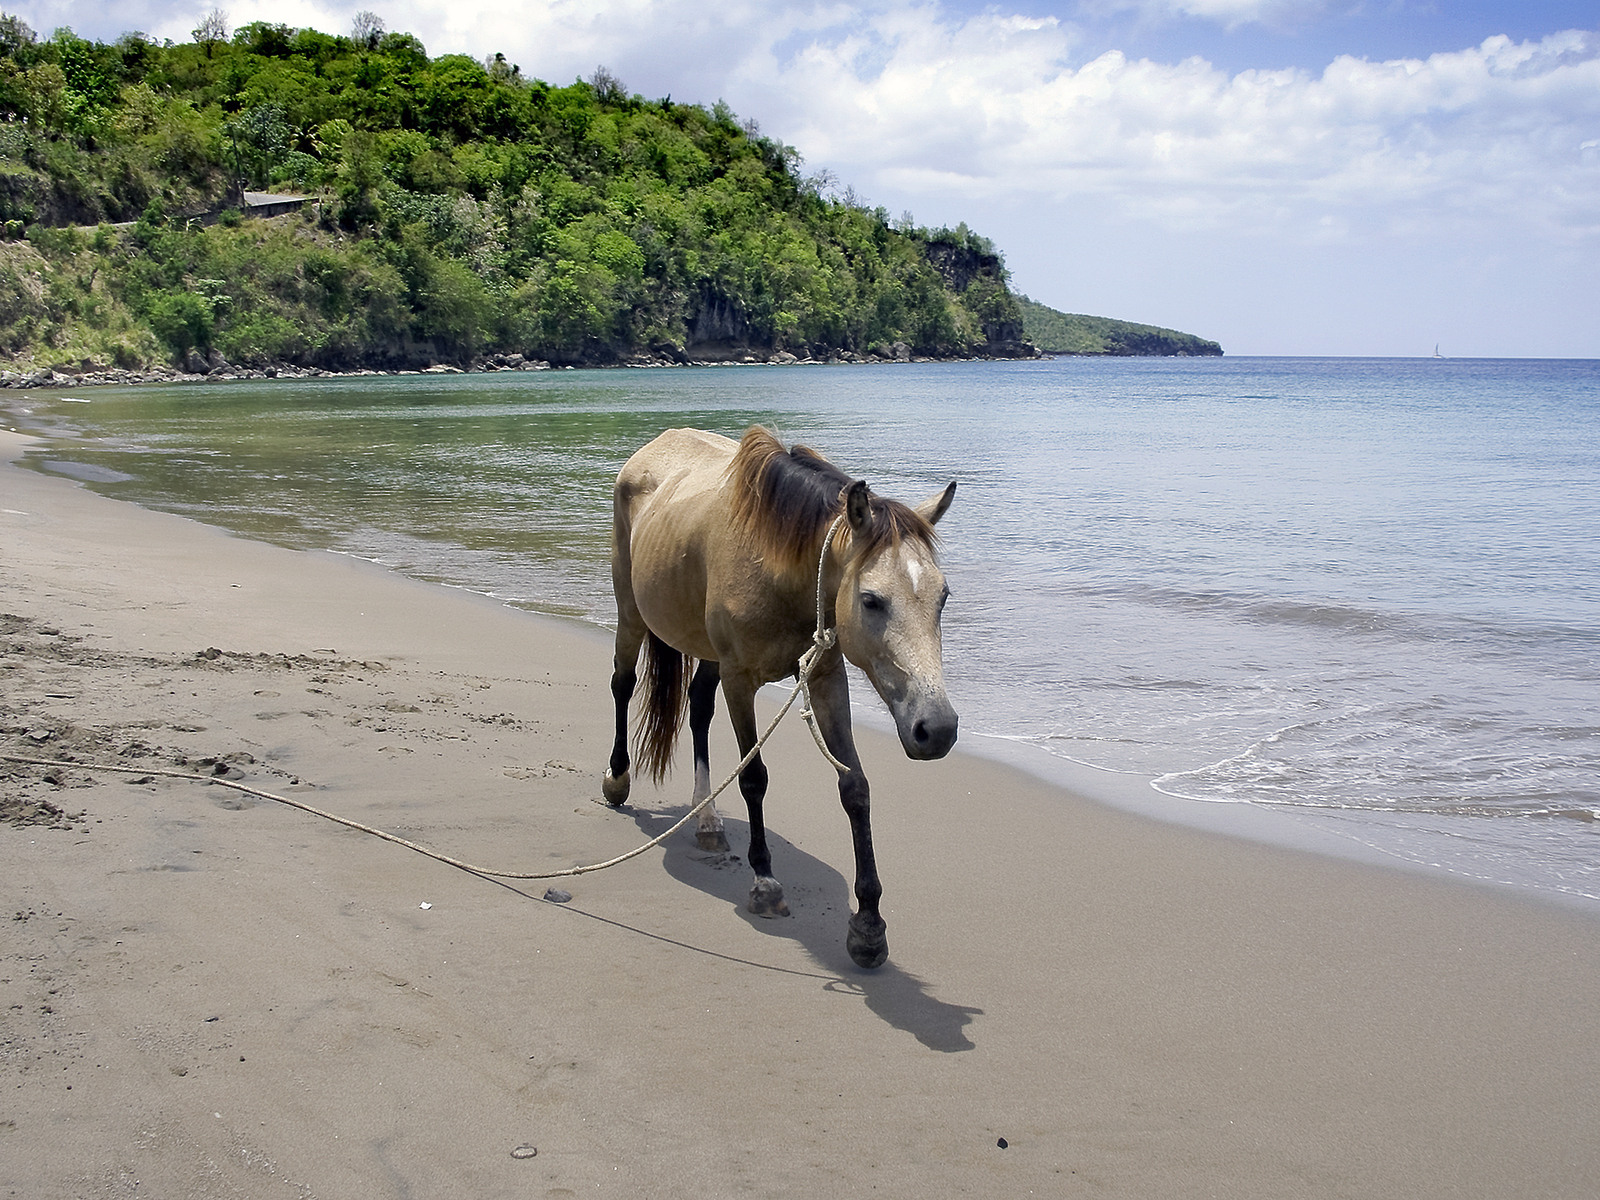 Saint Lucia horseback excursion, one of the best things to do on the island